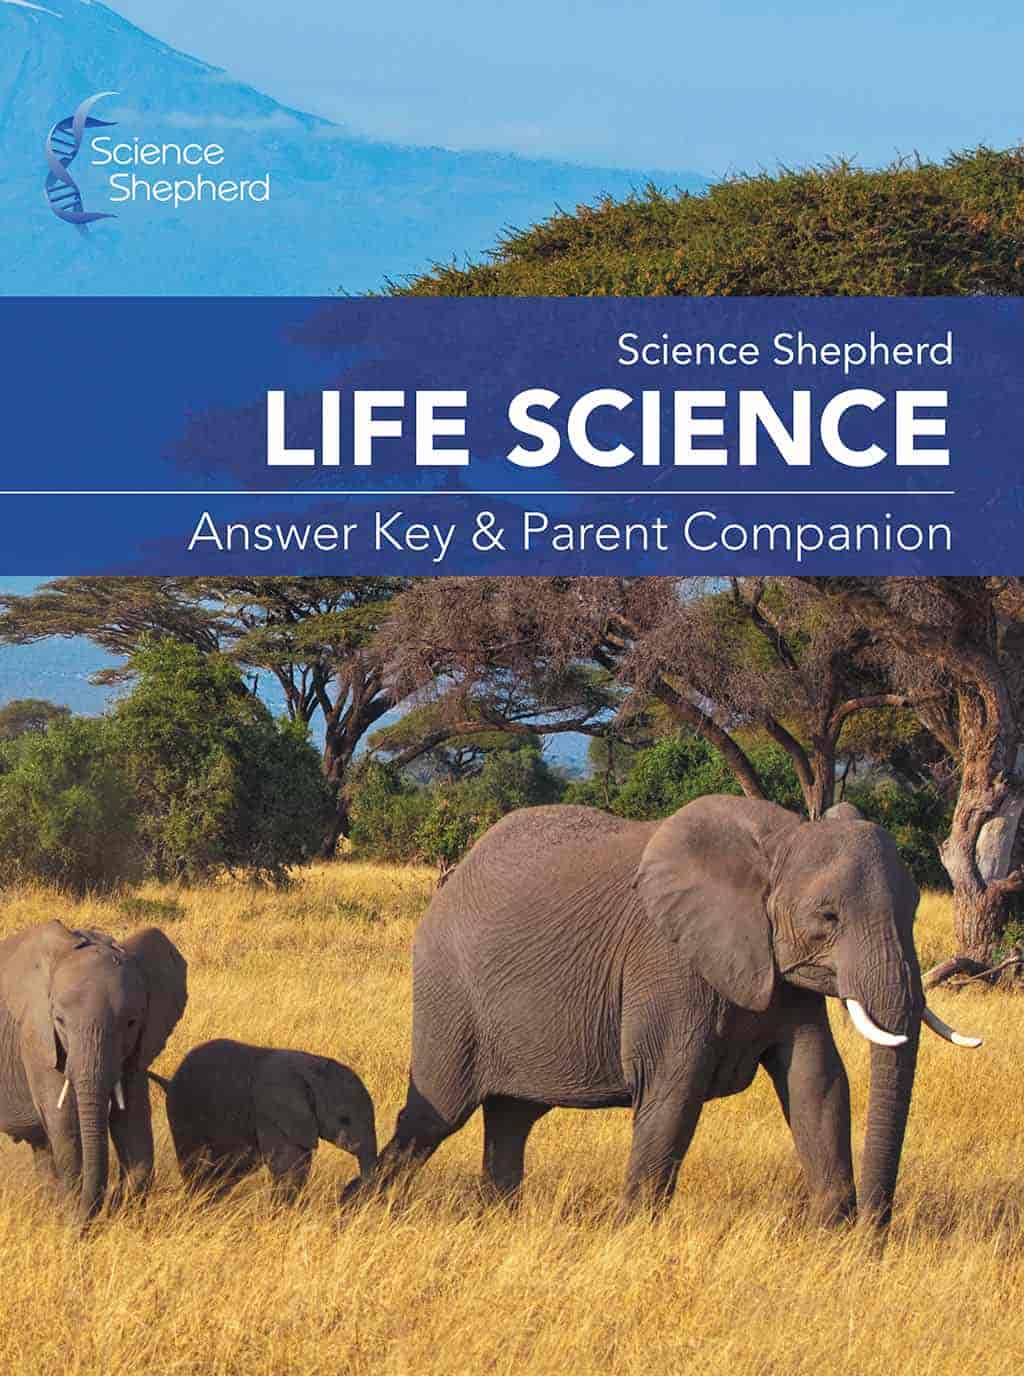 Science Shepherd middle school homeschool science Answer Key and Parent Companion cover of elephants